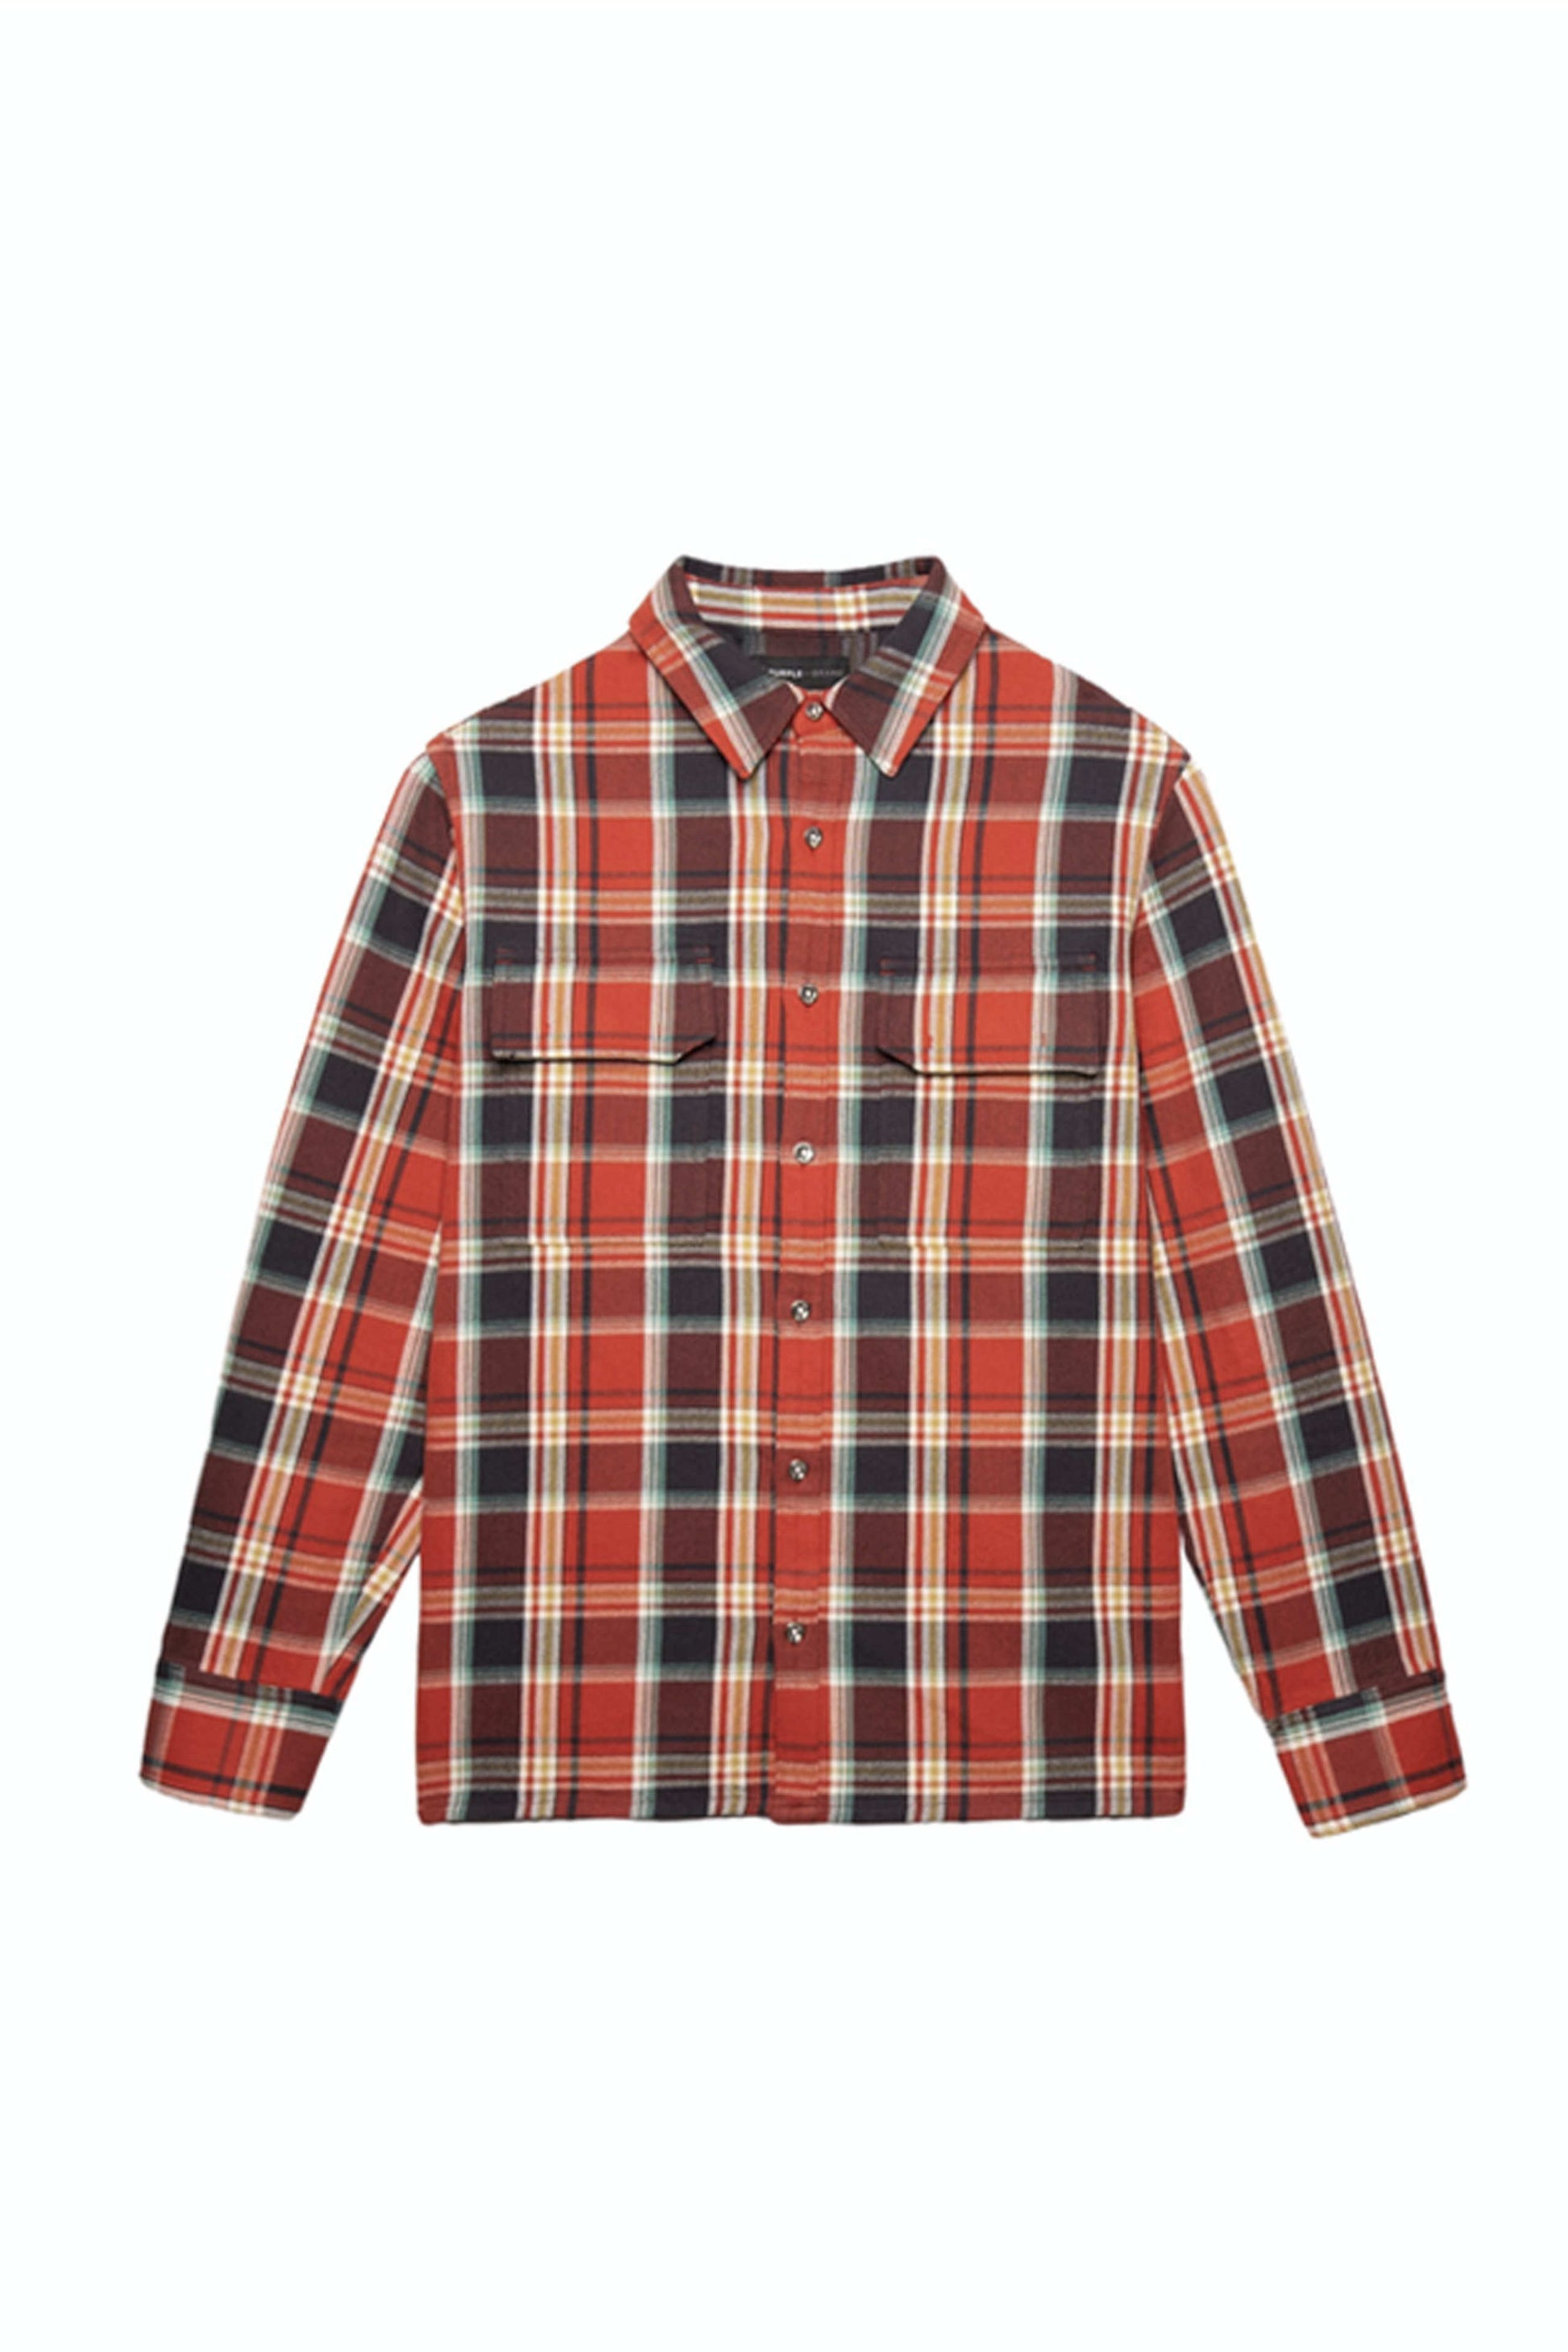 PURPLE BRAND - Men's Long Sleeve Shirt - Style No. P309 - Canvas Plaid Red - Front